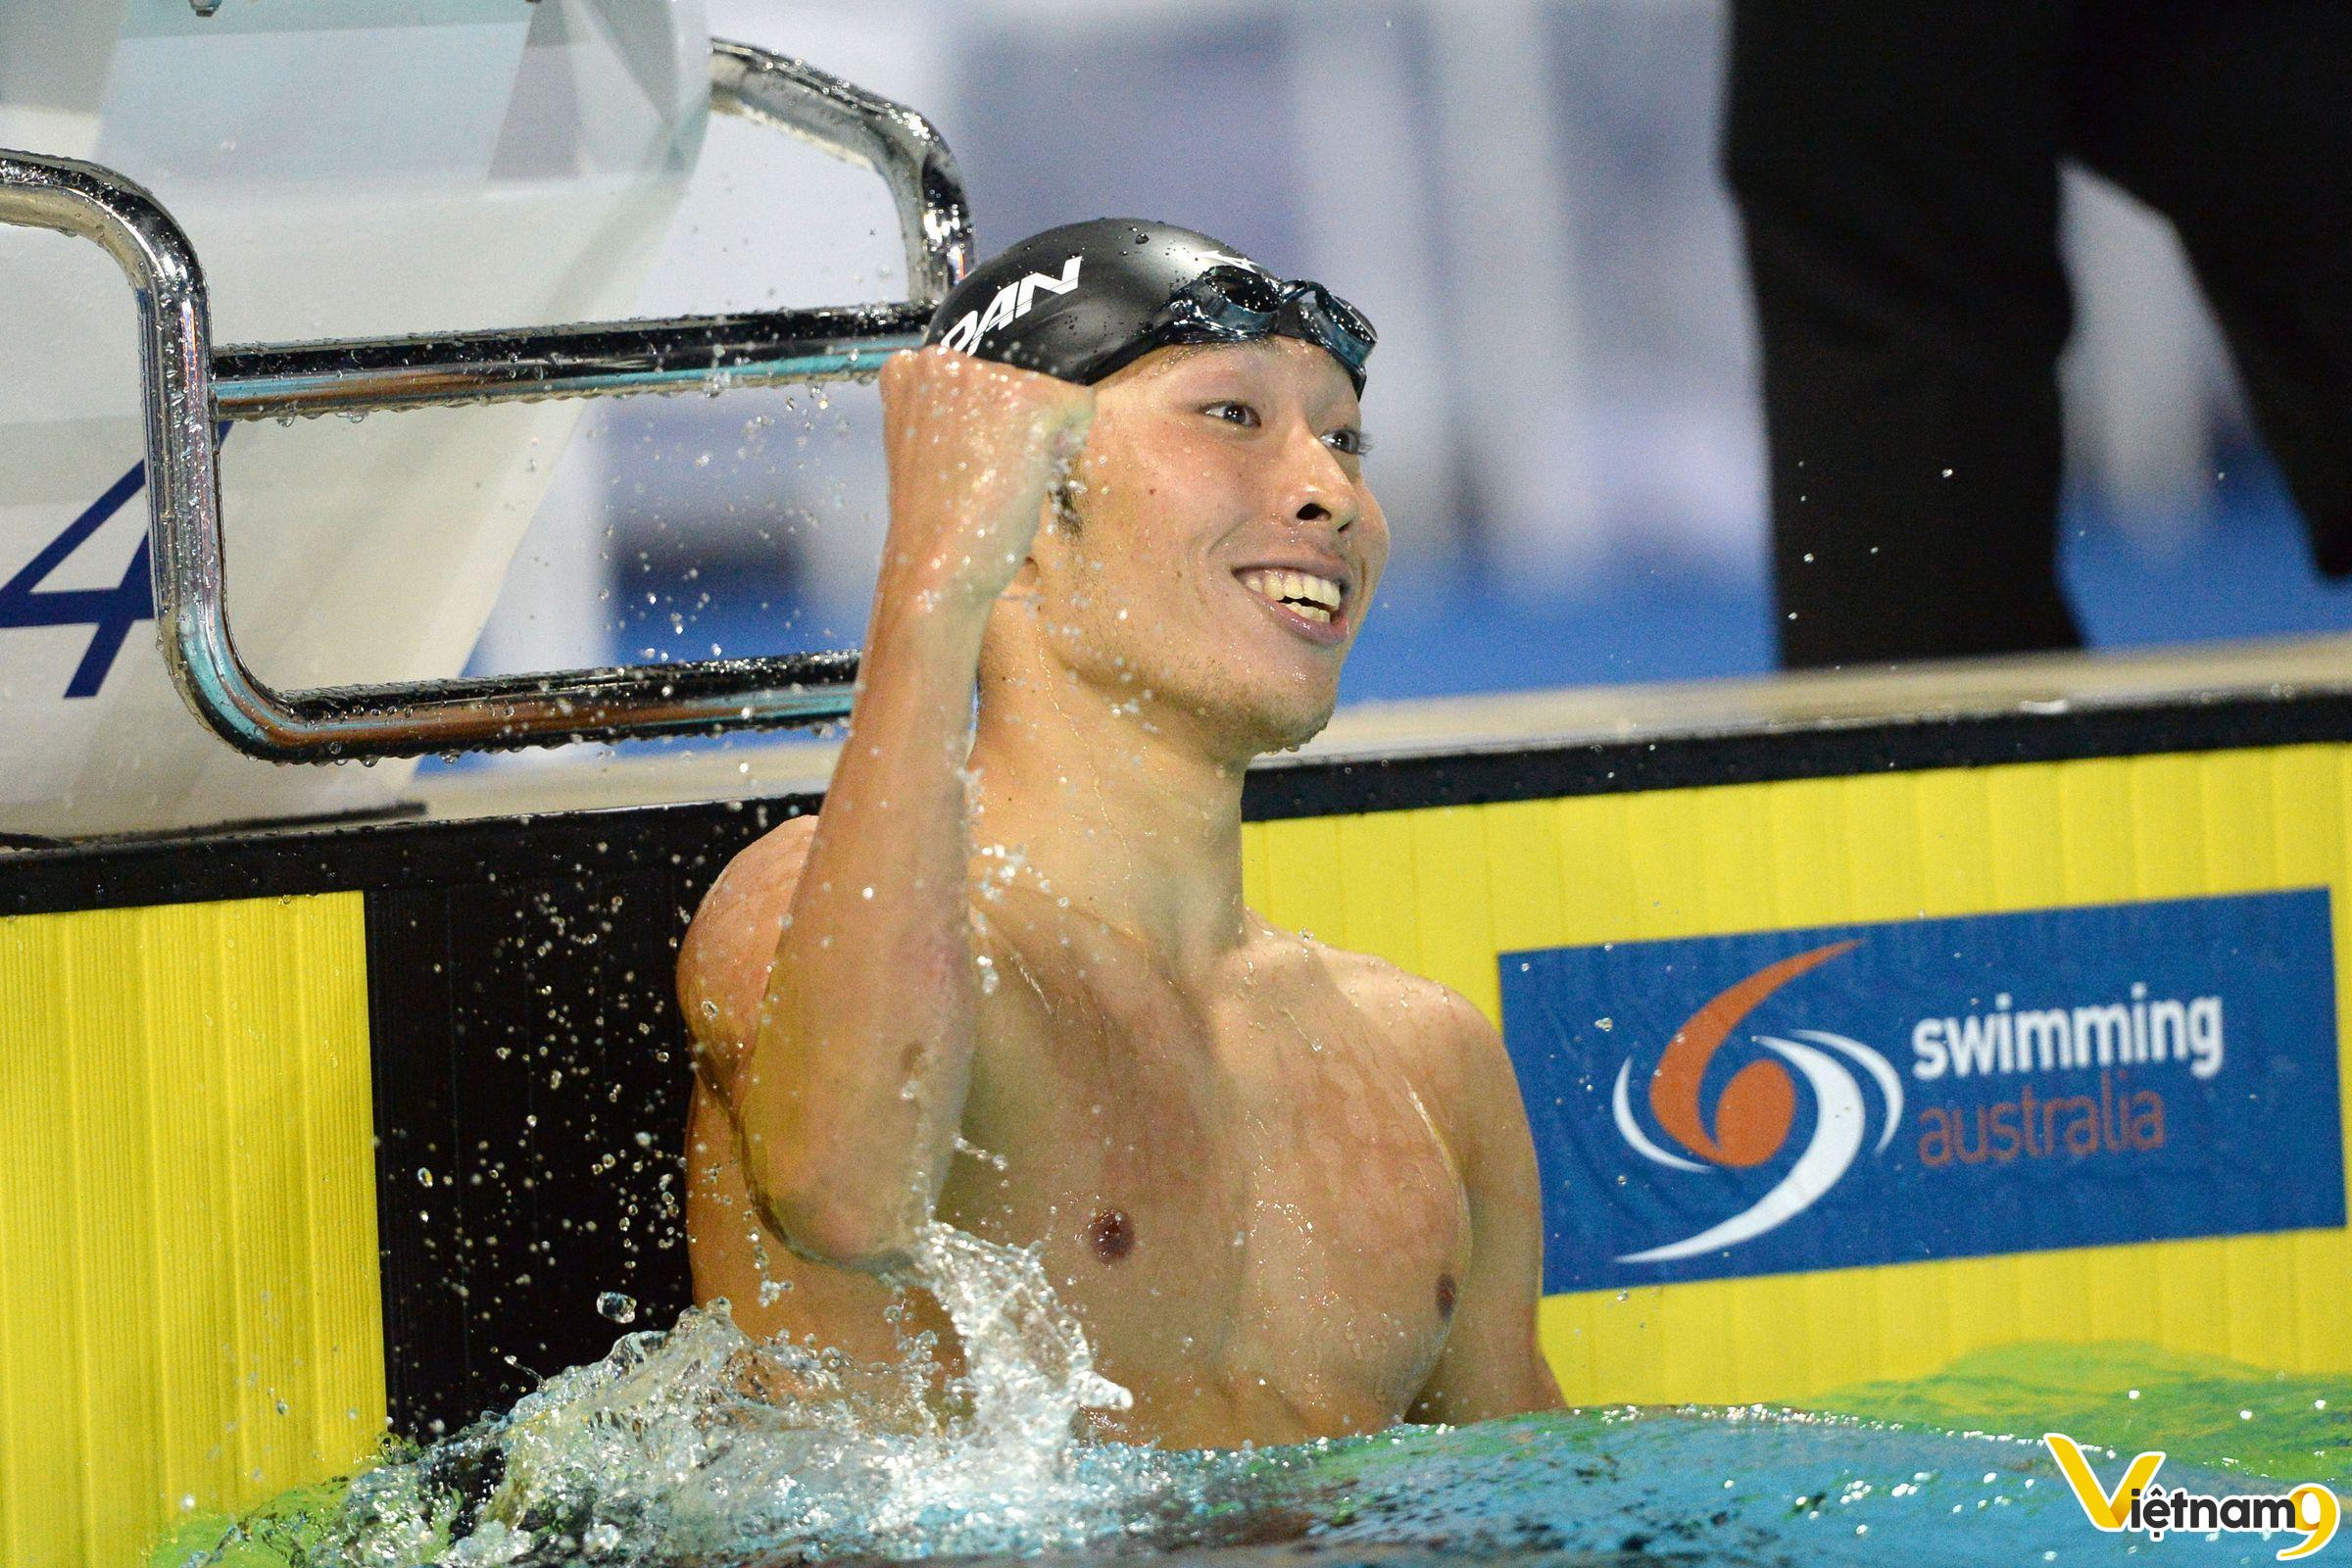 Asian Games 2014 - Vietnam9.net - Kosuke Hagino Named Most Valuable Player of Entire Asian Games 2014